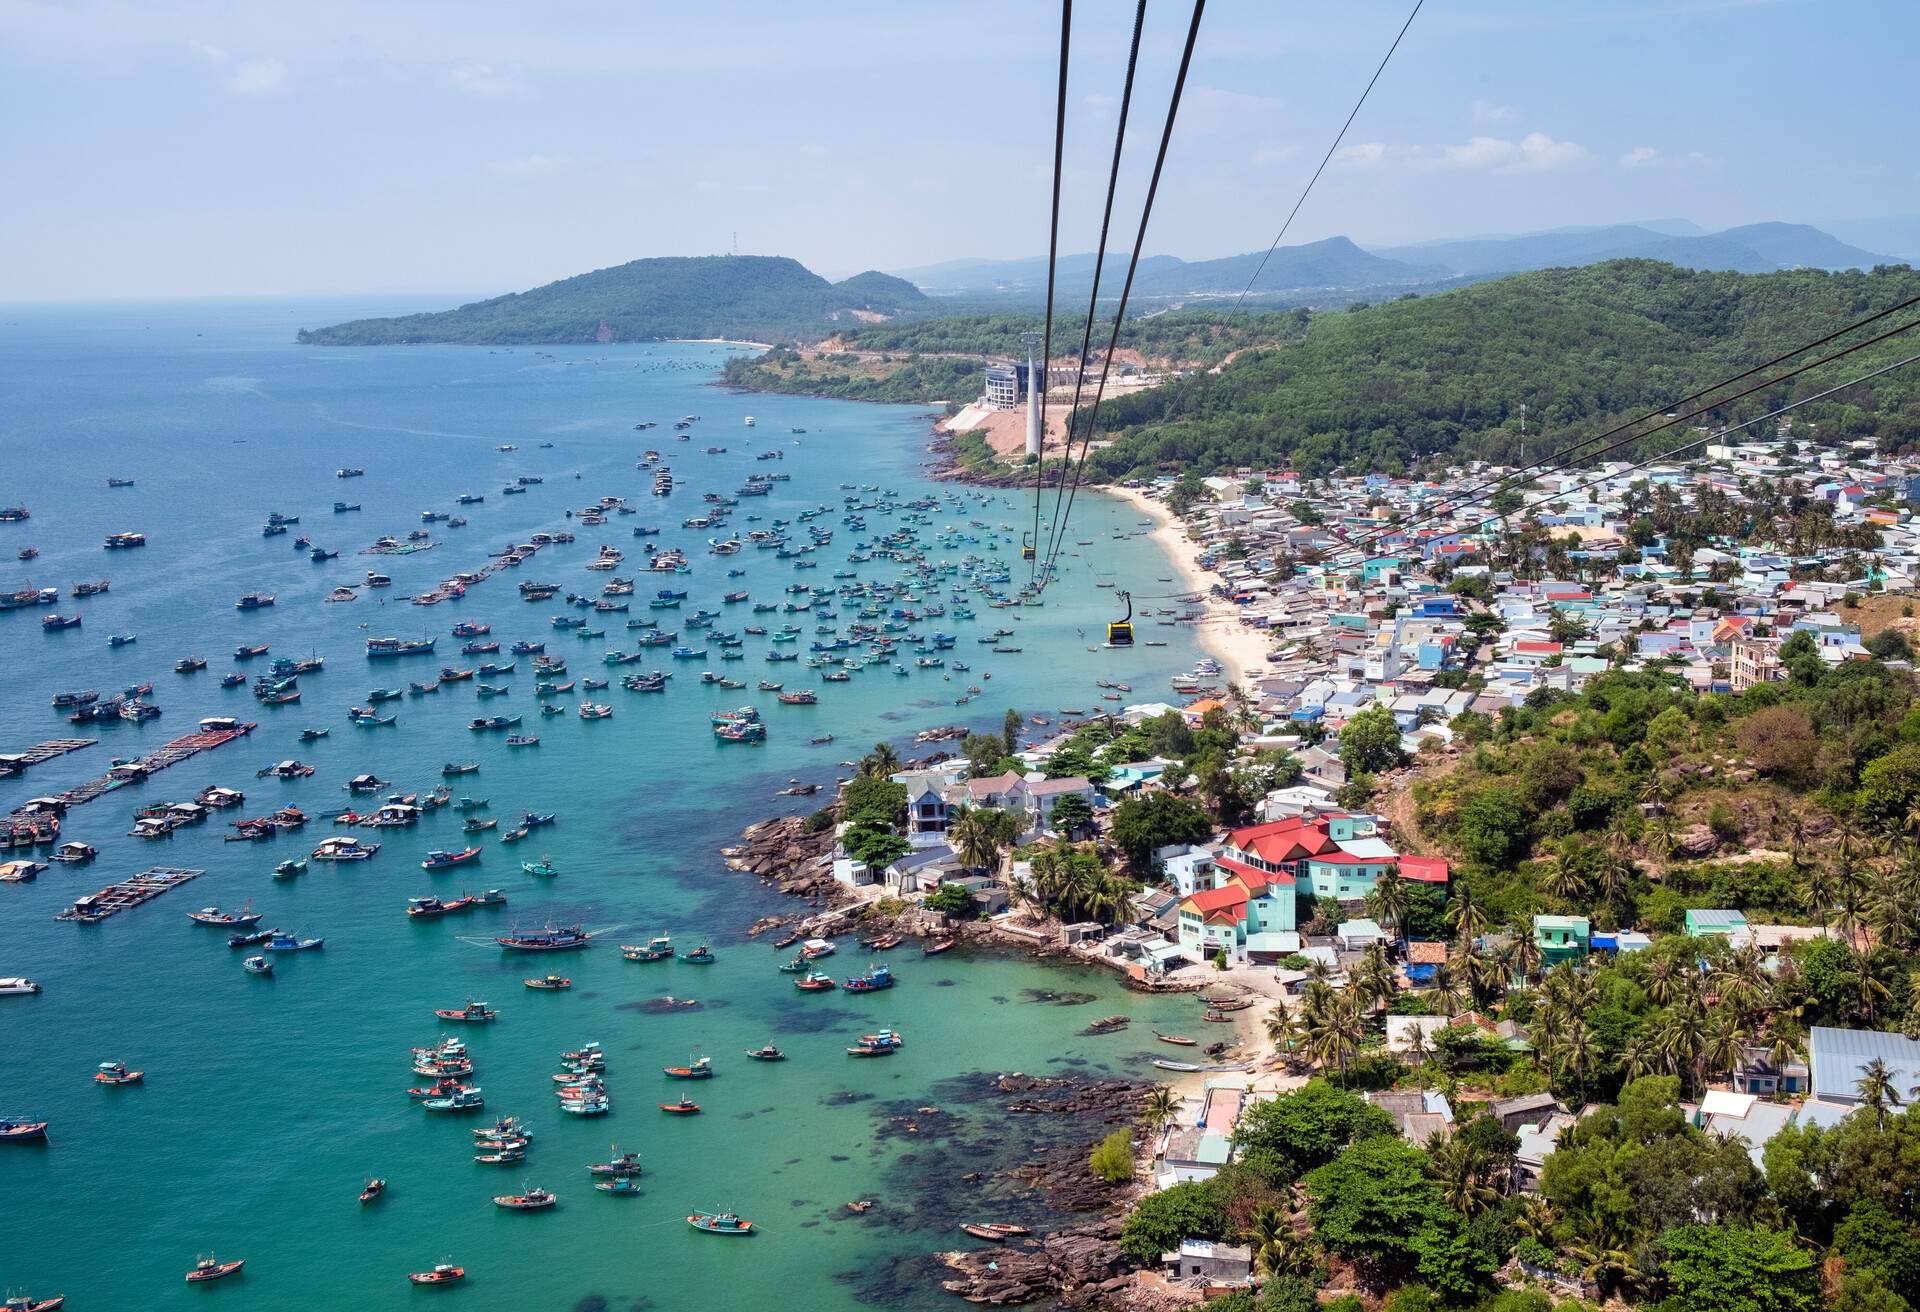 View of An Thoi fishing village and the Phu Quoc island cable car in the Kien Giang Biosphere Reserve on Phu Quoc island in southern Vietnam